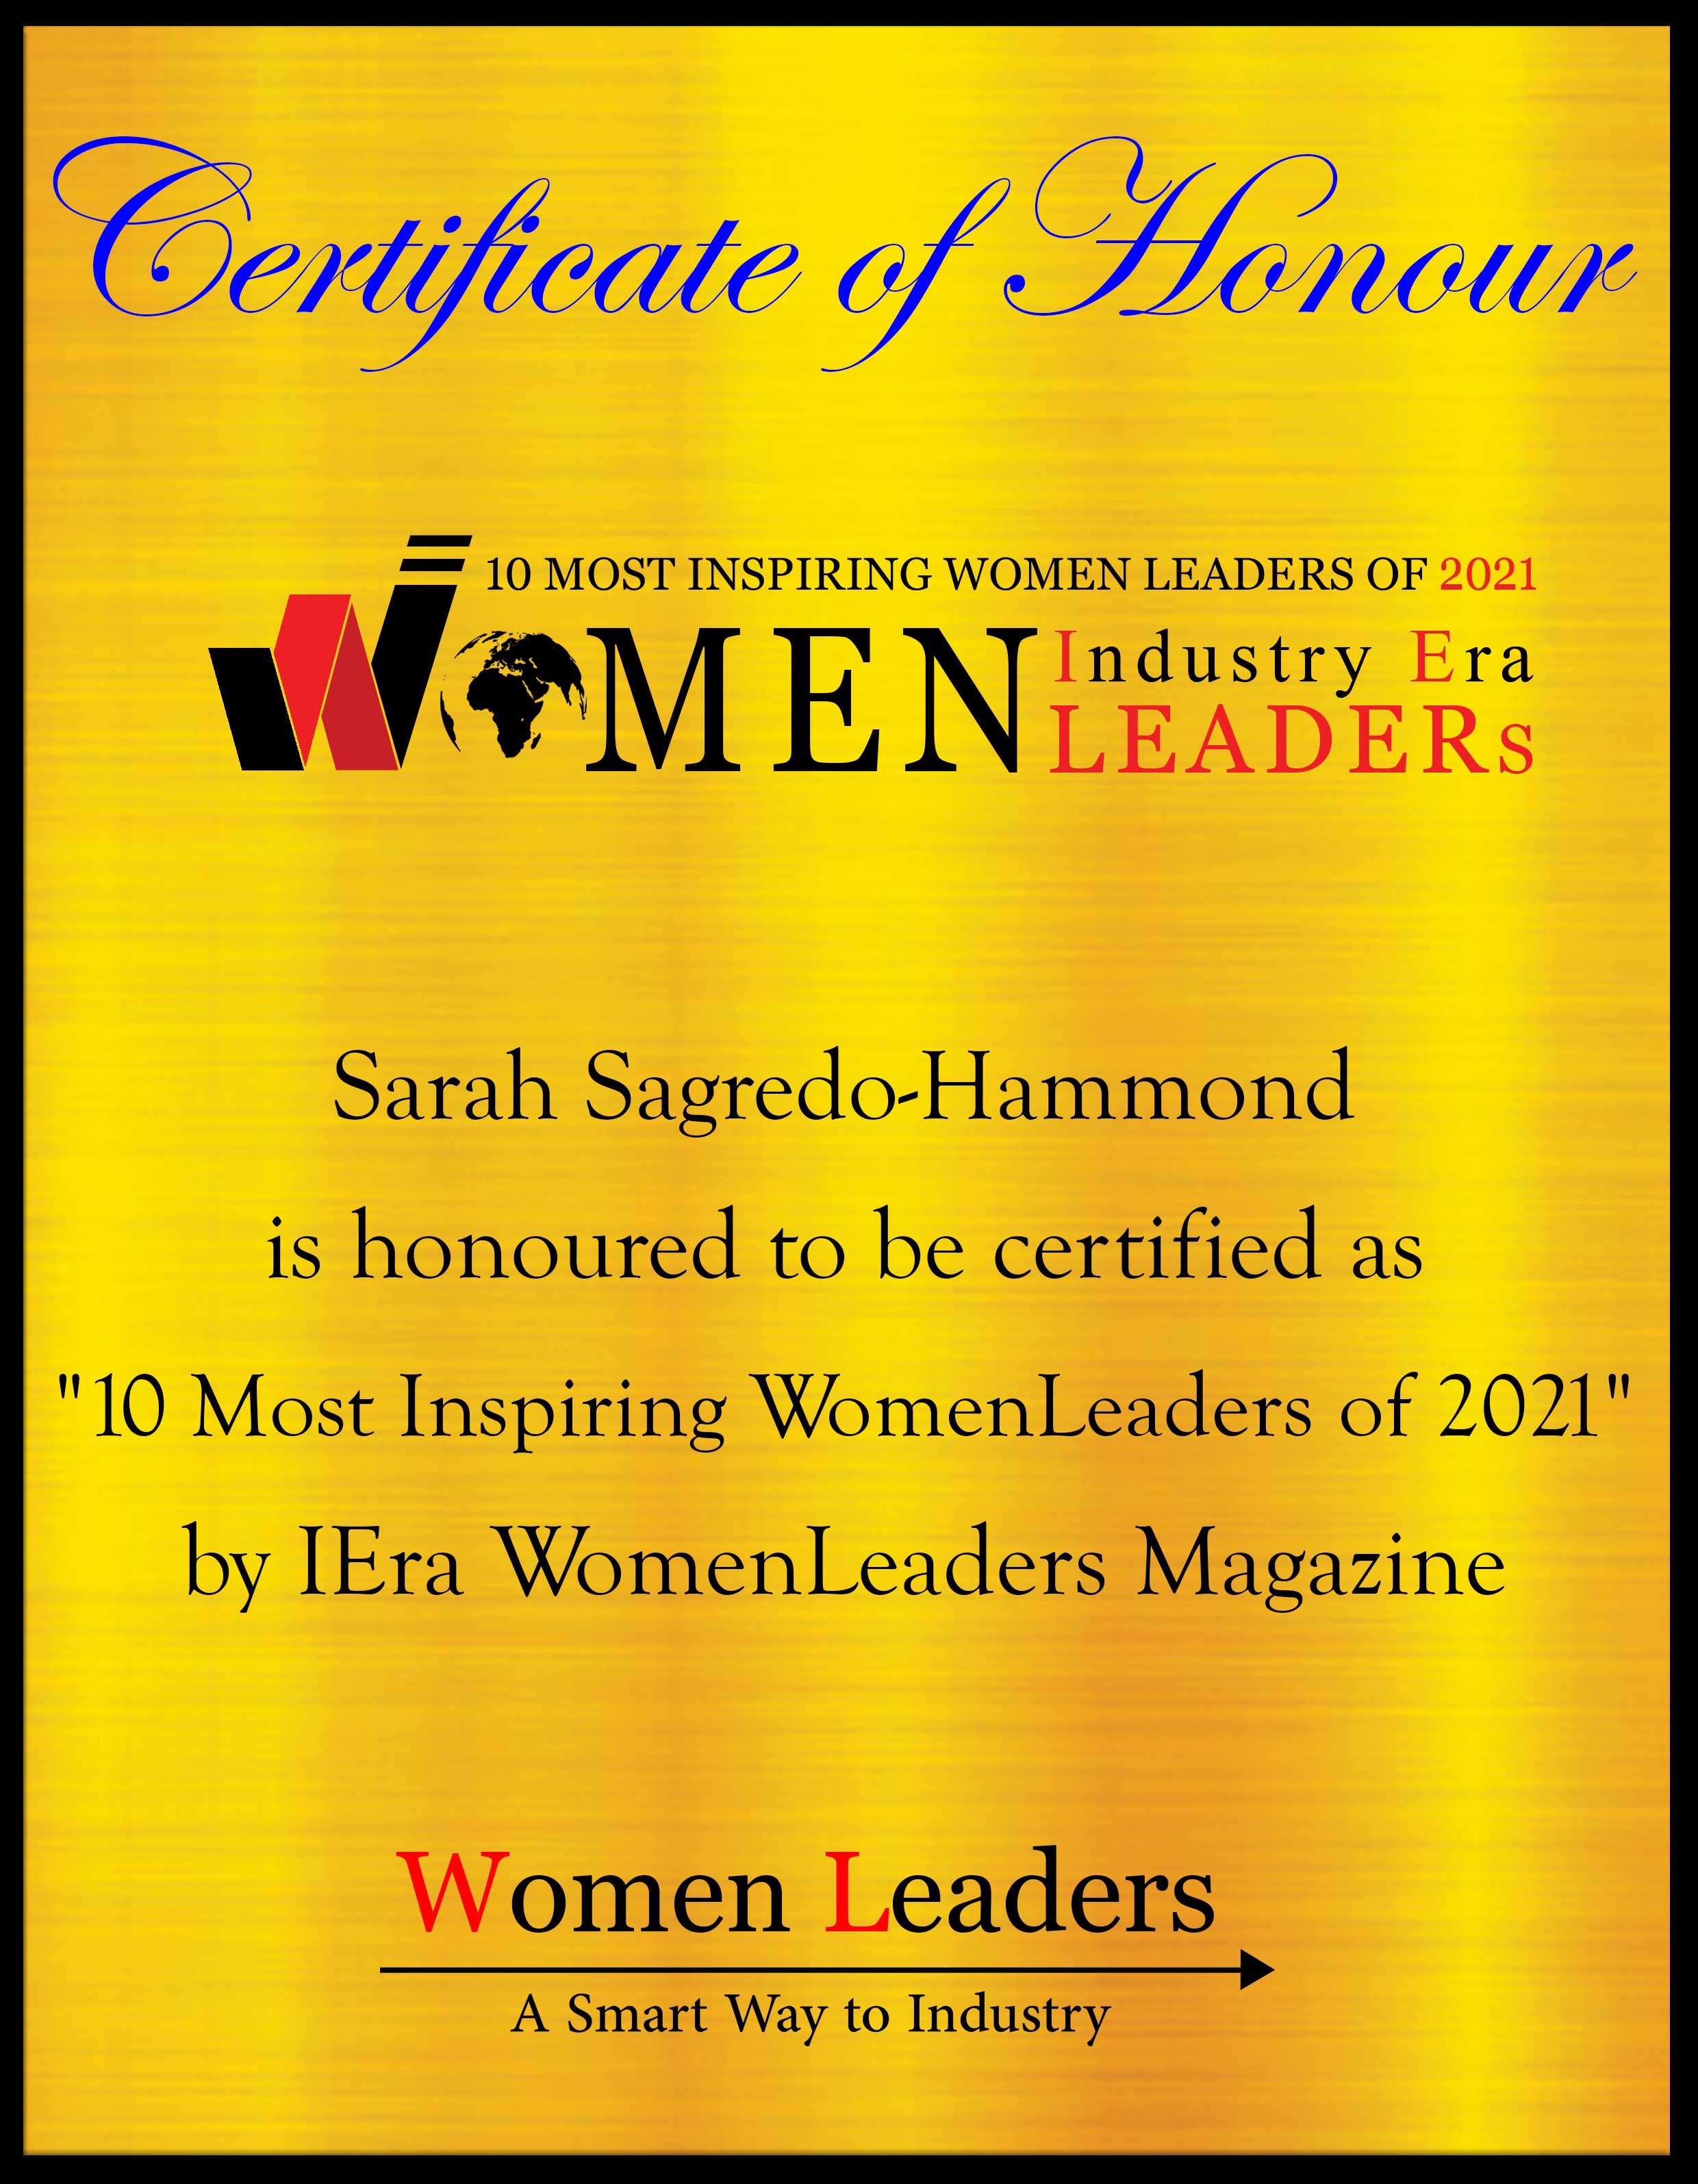 Sarah Sagredo-Hammond, Business Owner / President of Atlas Electric, Air Conditioning, Refrigeration & Plumbing Services Inc. Most Inspiring WomenLeaders of 2021